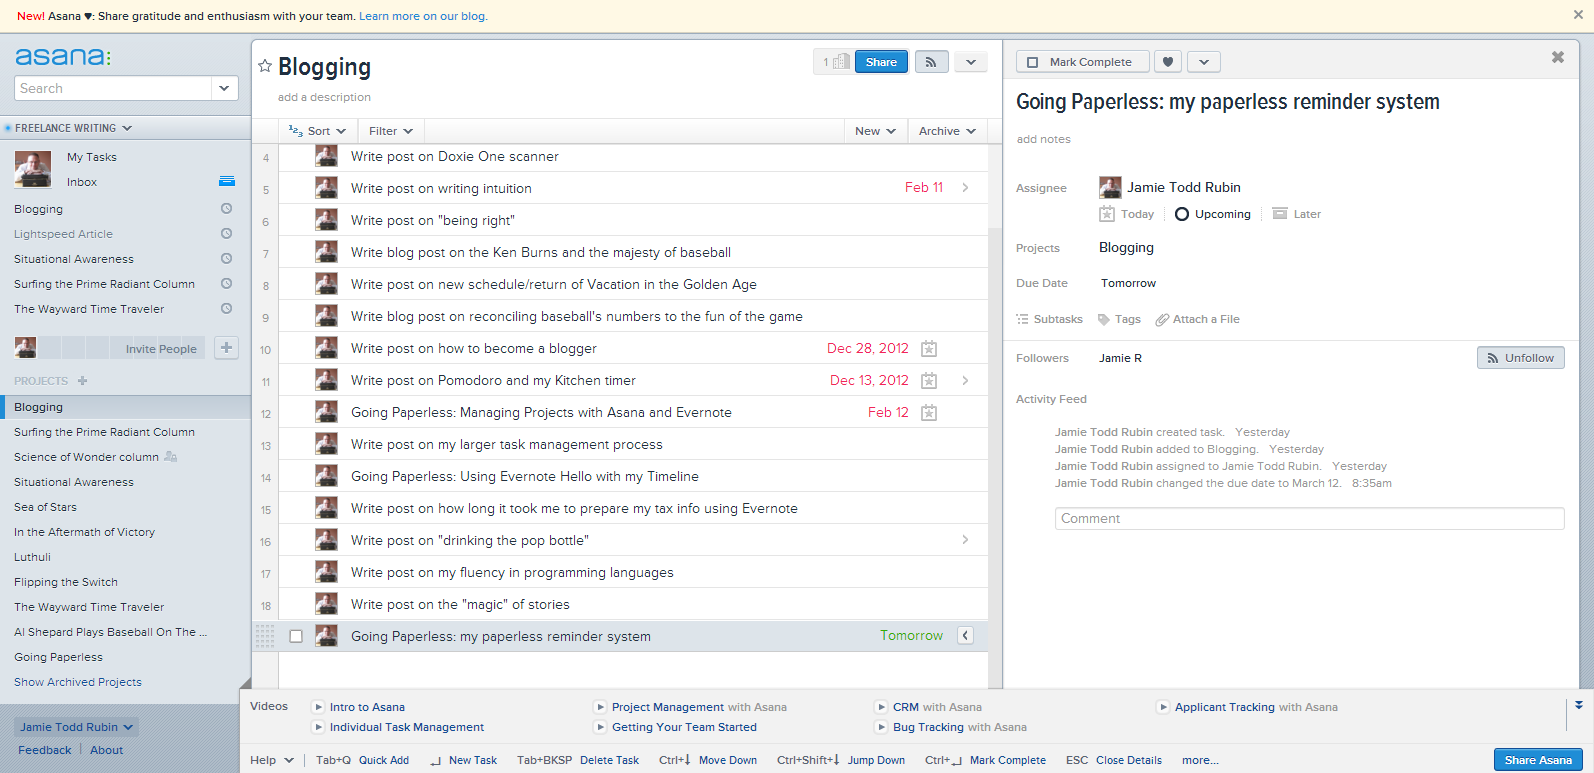 Overview of Asana interface